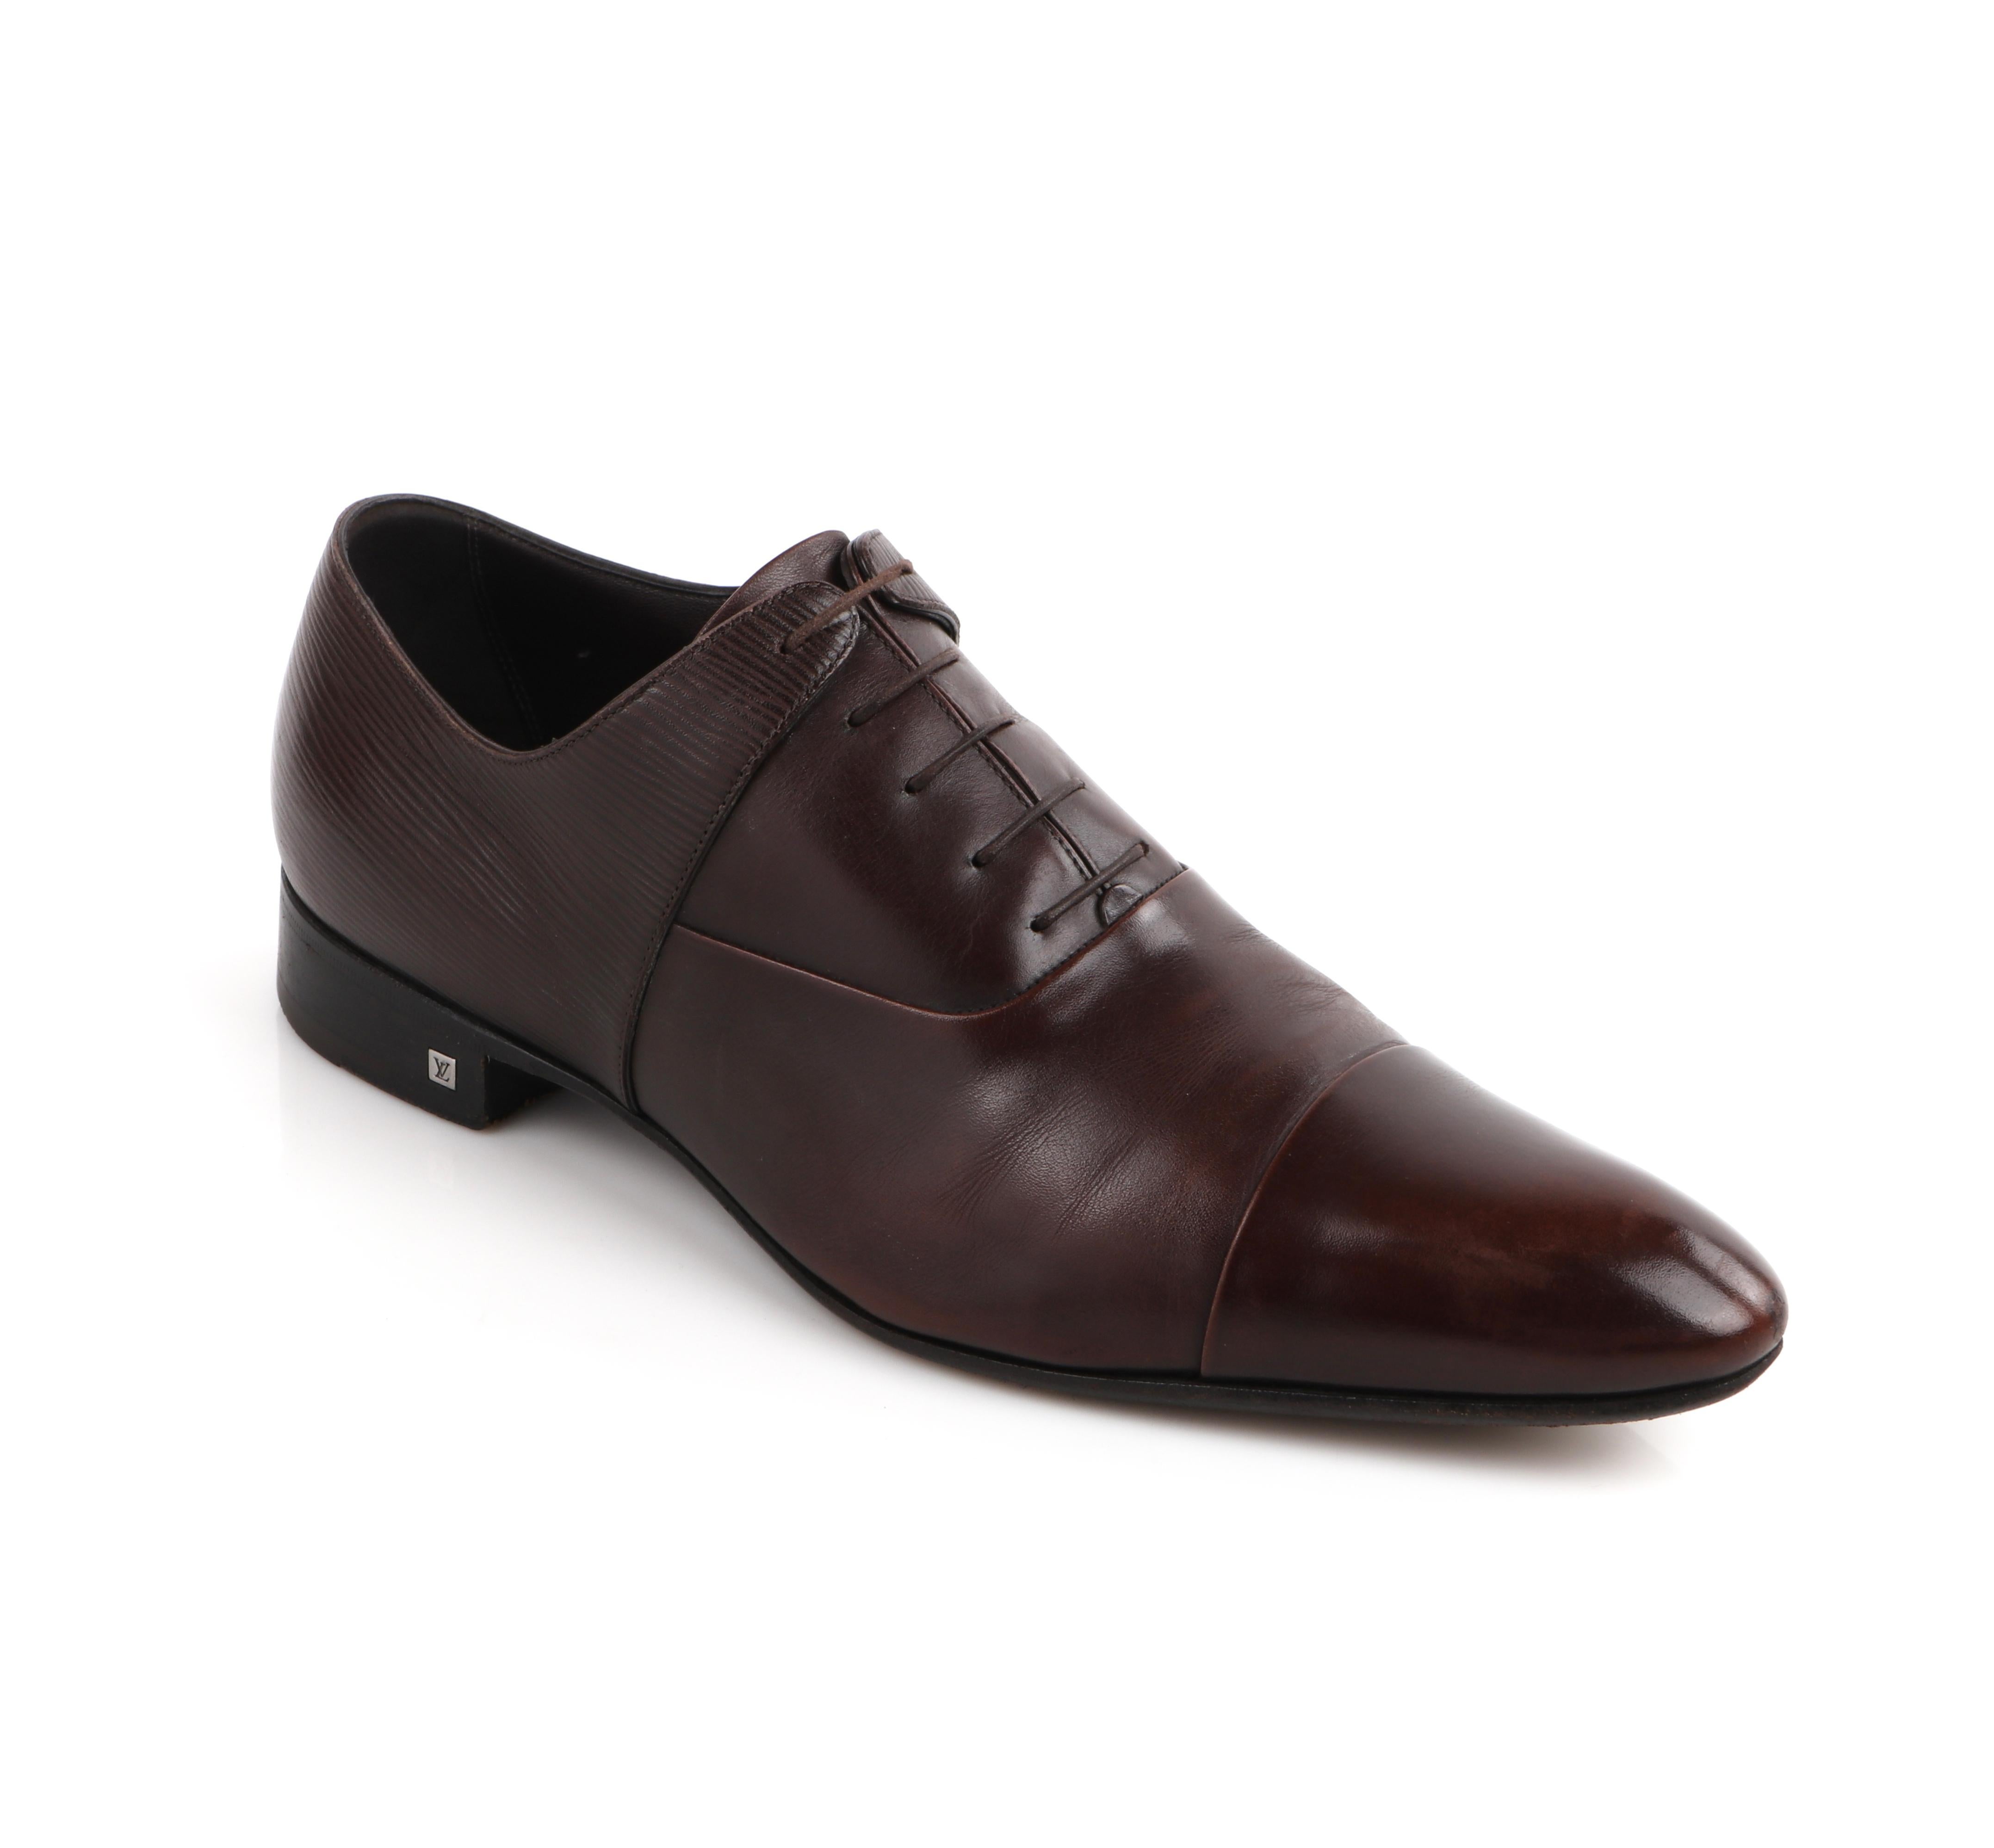 LOUIS VUITTON Dark Brown Polished Epi Leather Classic Cap Toe Dress Shoes
 
Brand / Manufacturer: Louis Vuitton 
Style: Dress shoes
Color(s): Brown 
Unmarked Materials: Leather (upper, insoles, soles) 
Additional Details / Inclusions: lace up;